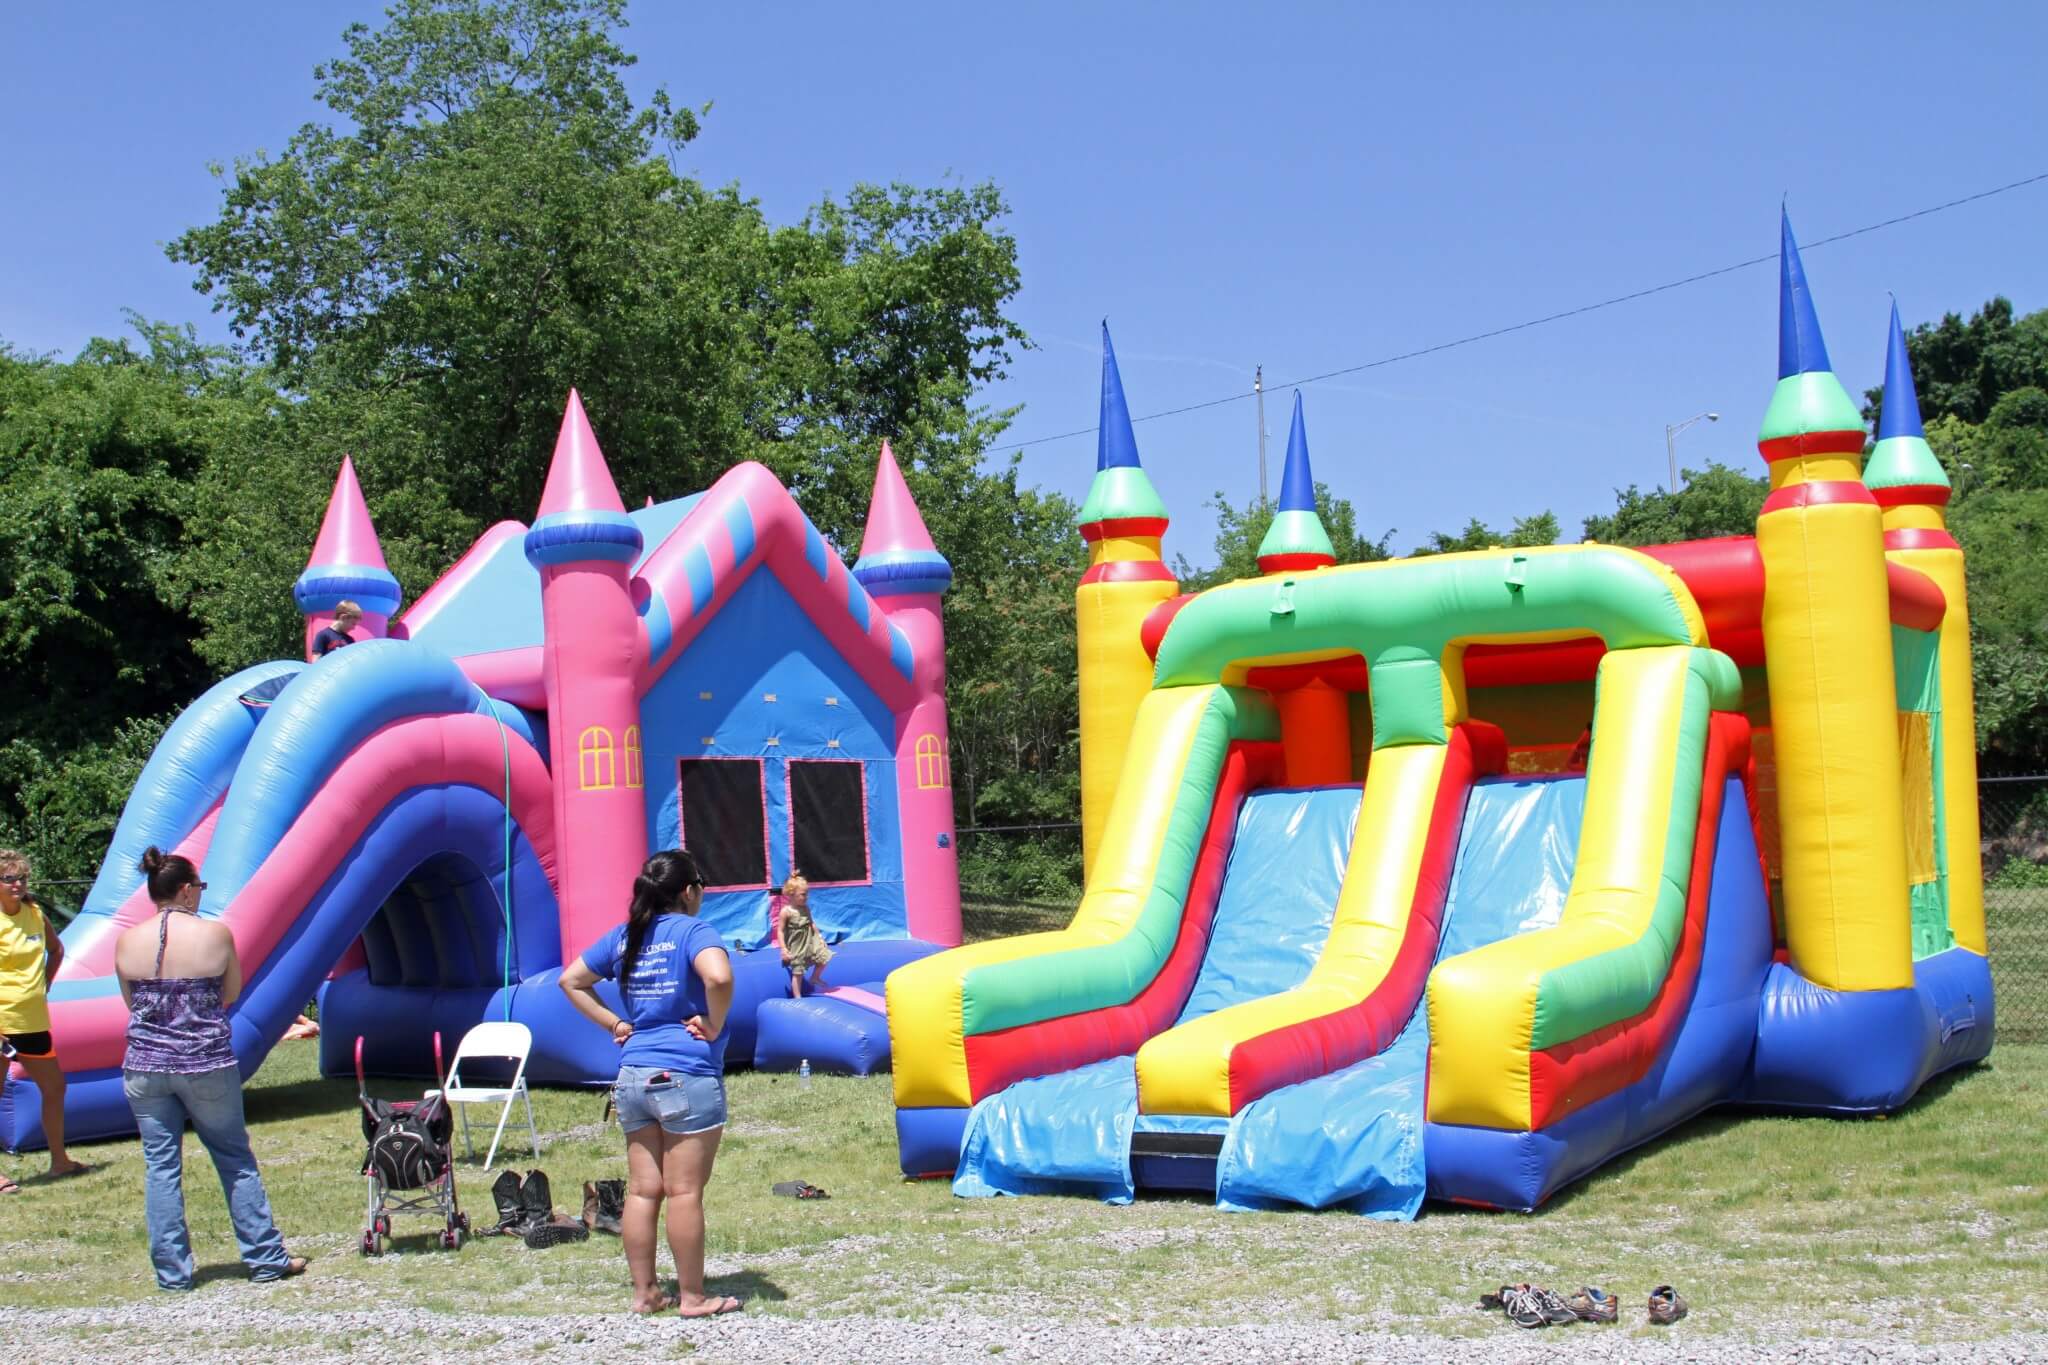 The Diesel Truck Series Knoxville promoters had something to keep everyone entertained, including the little ones, thanks to a pair of colorful bounce house castles.